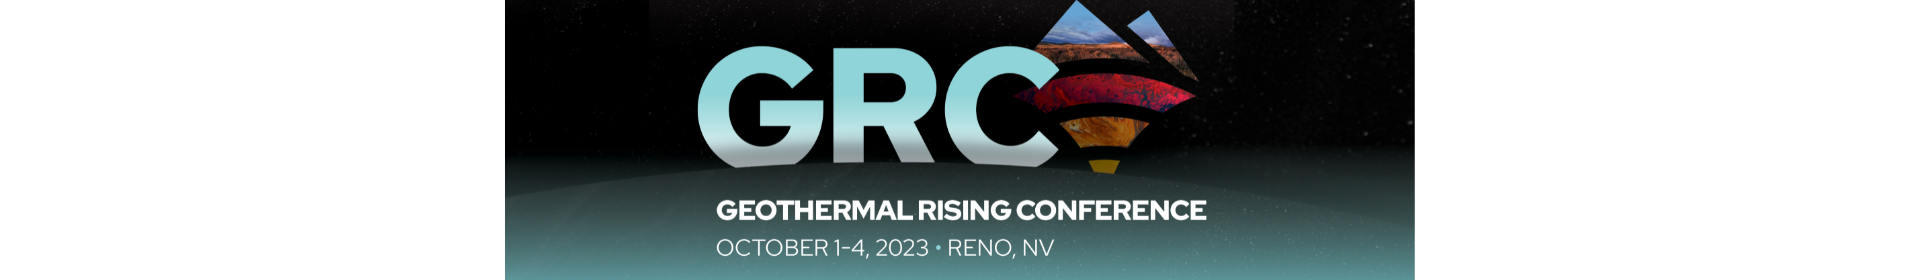 Geothermal Rising 2023 Event Banner